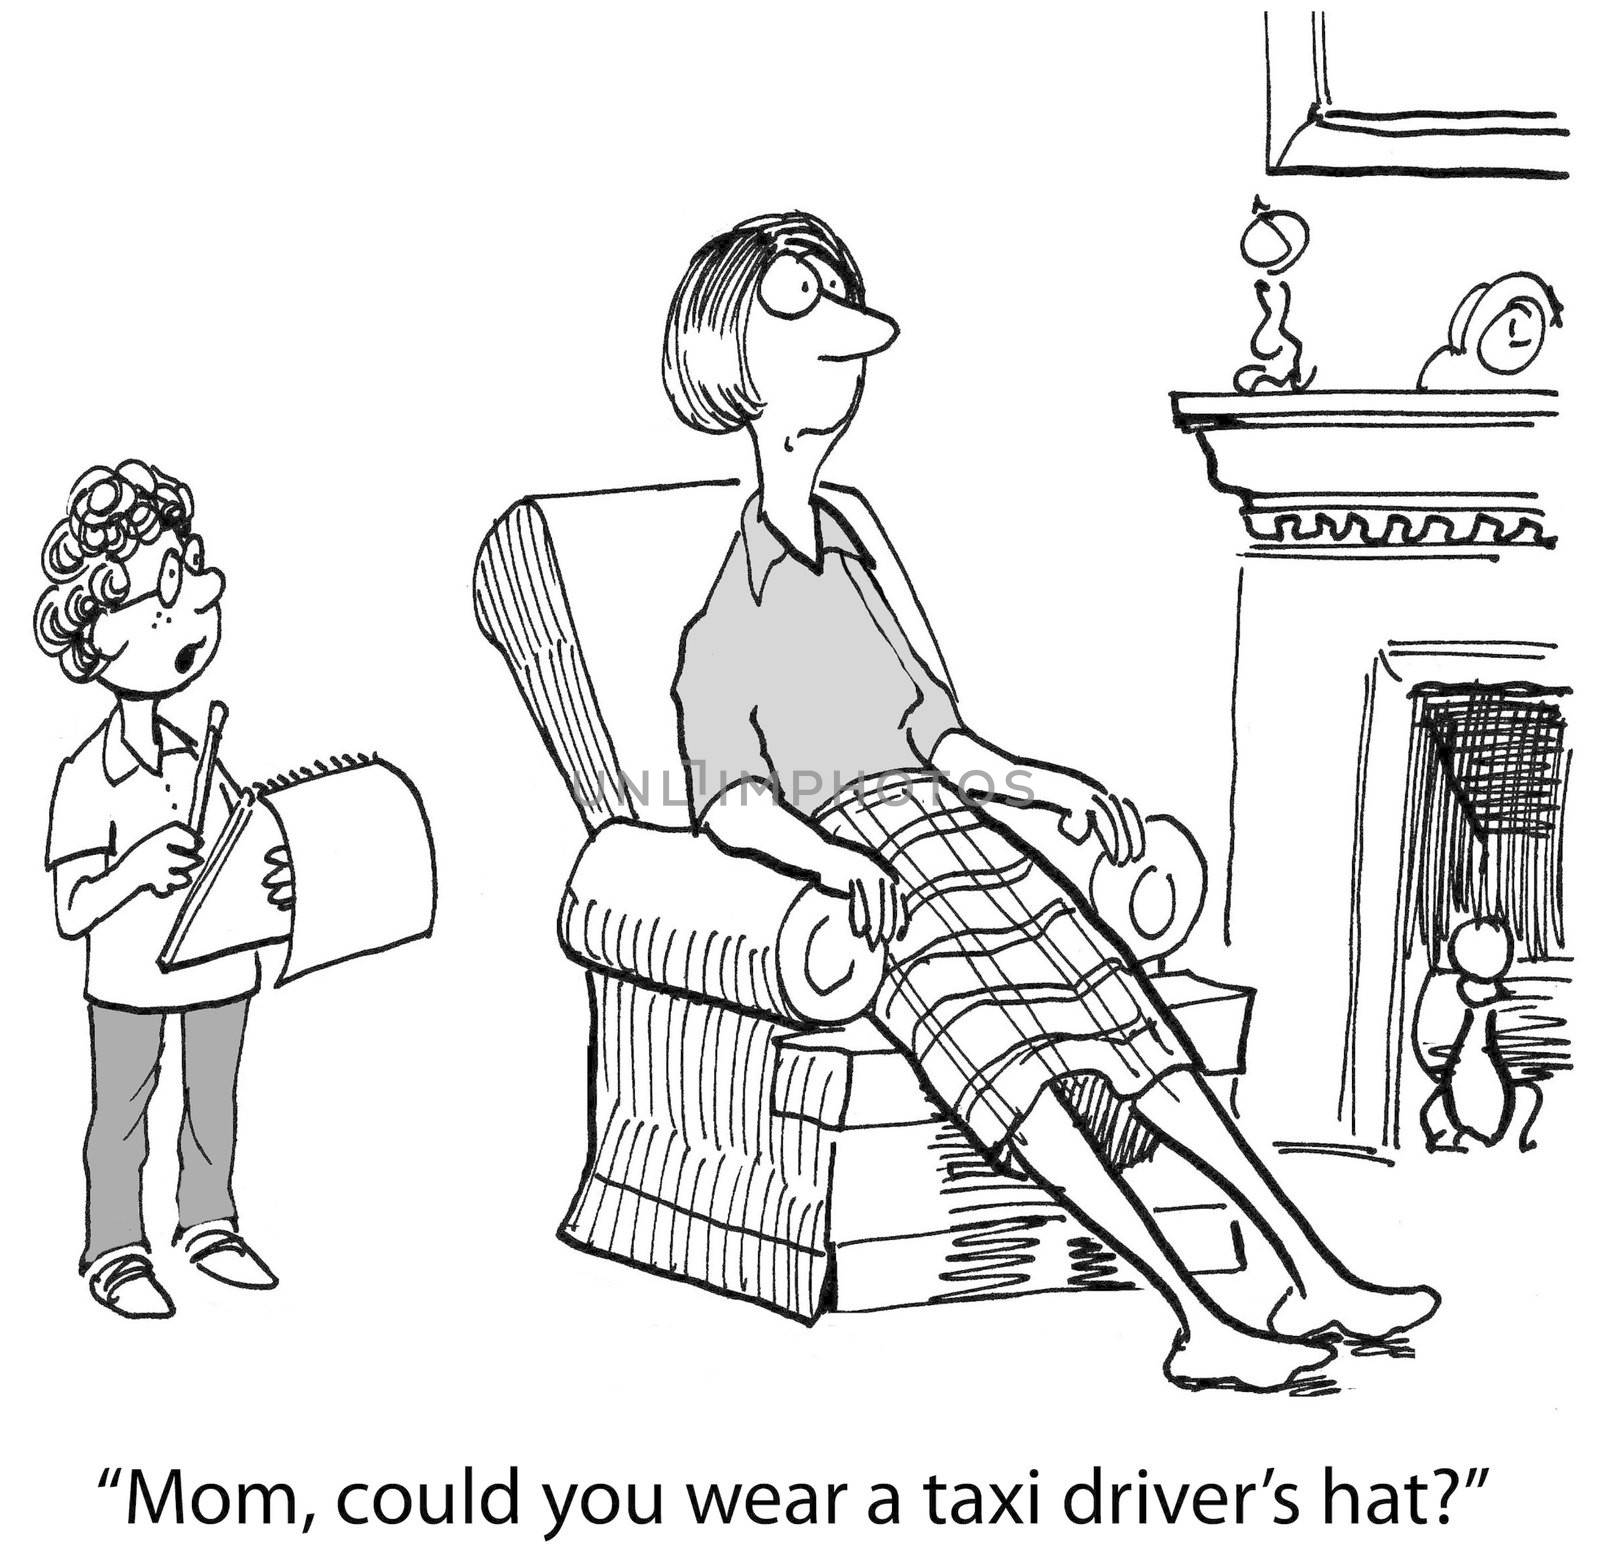 Moms Are Taxi Drivers! by andrewgenn